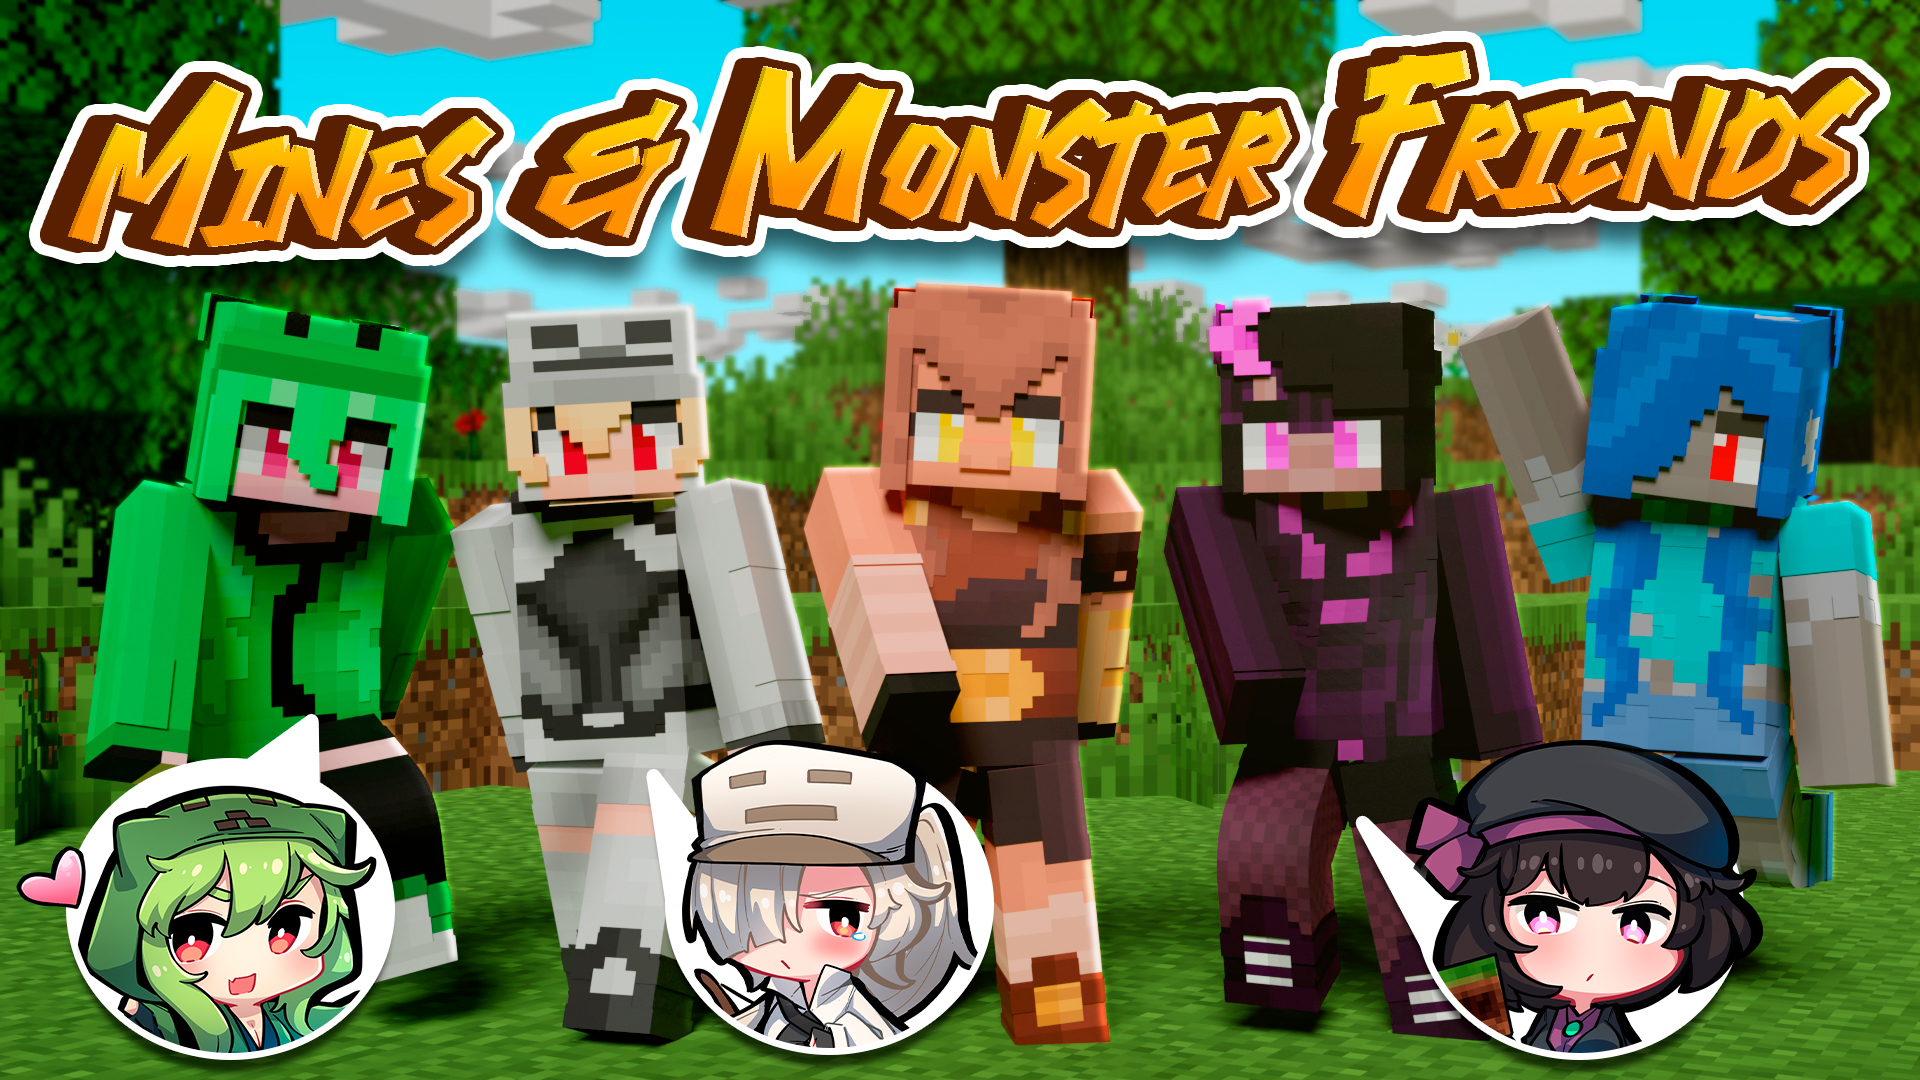 Mines and Monster Friends